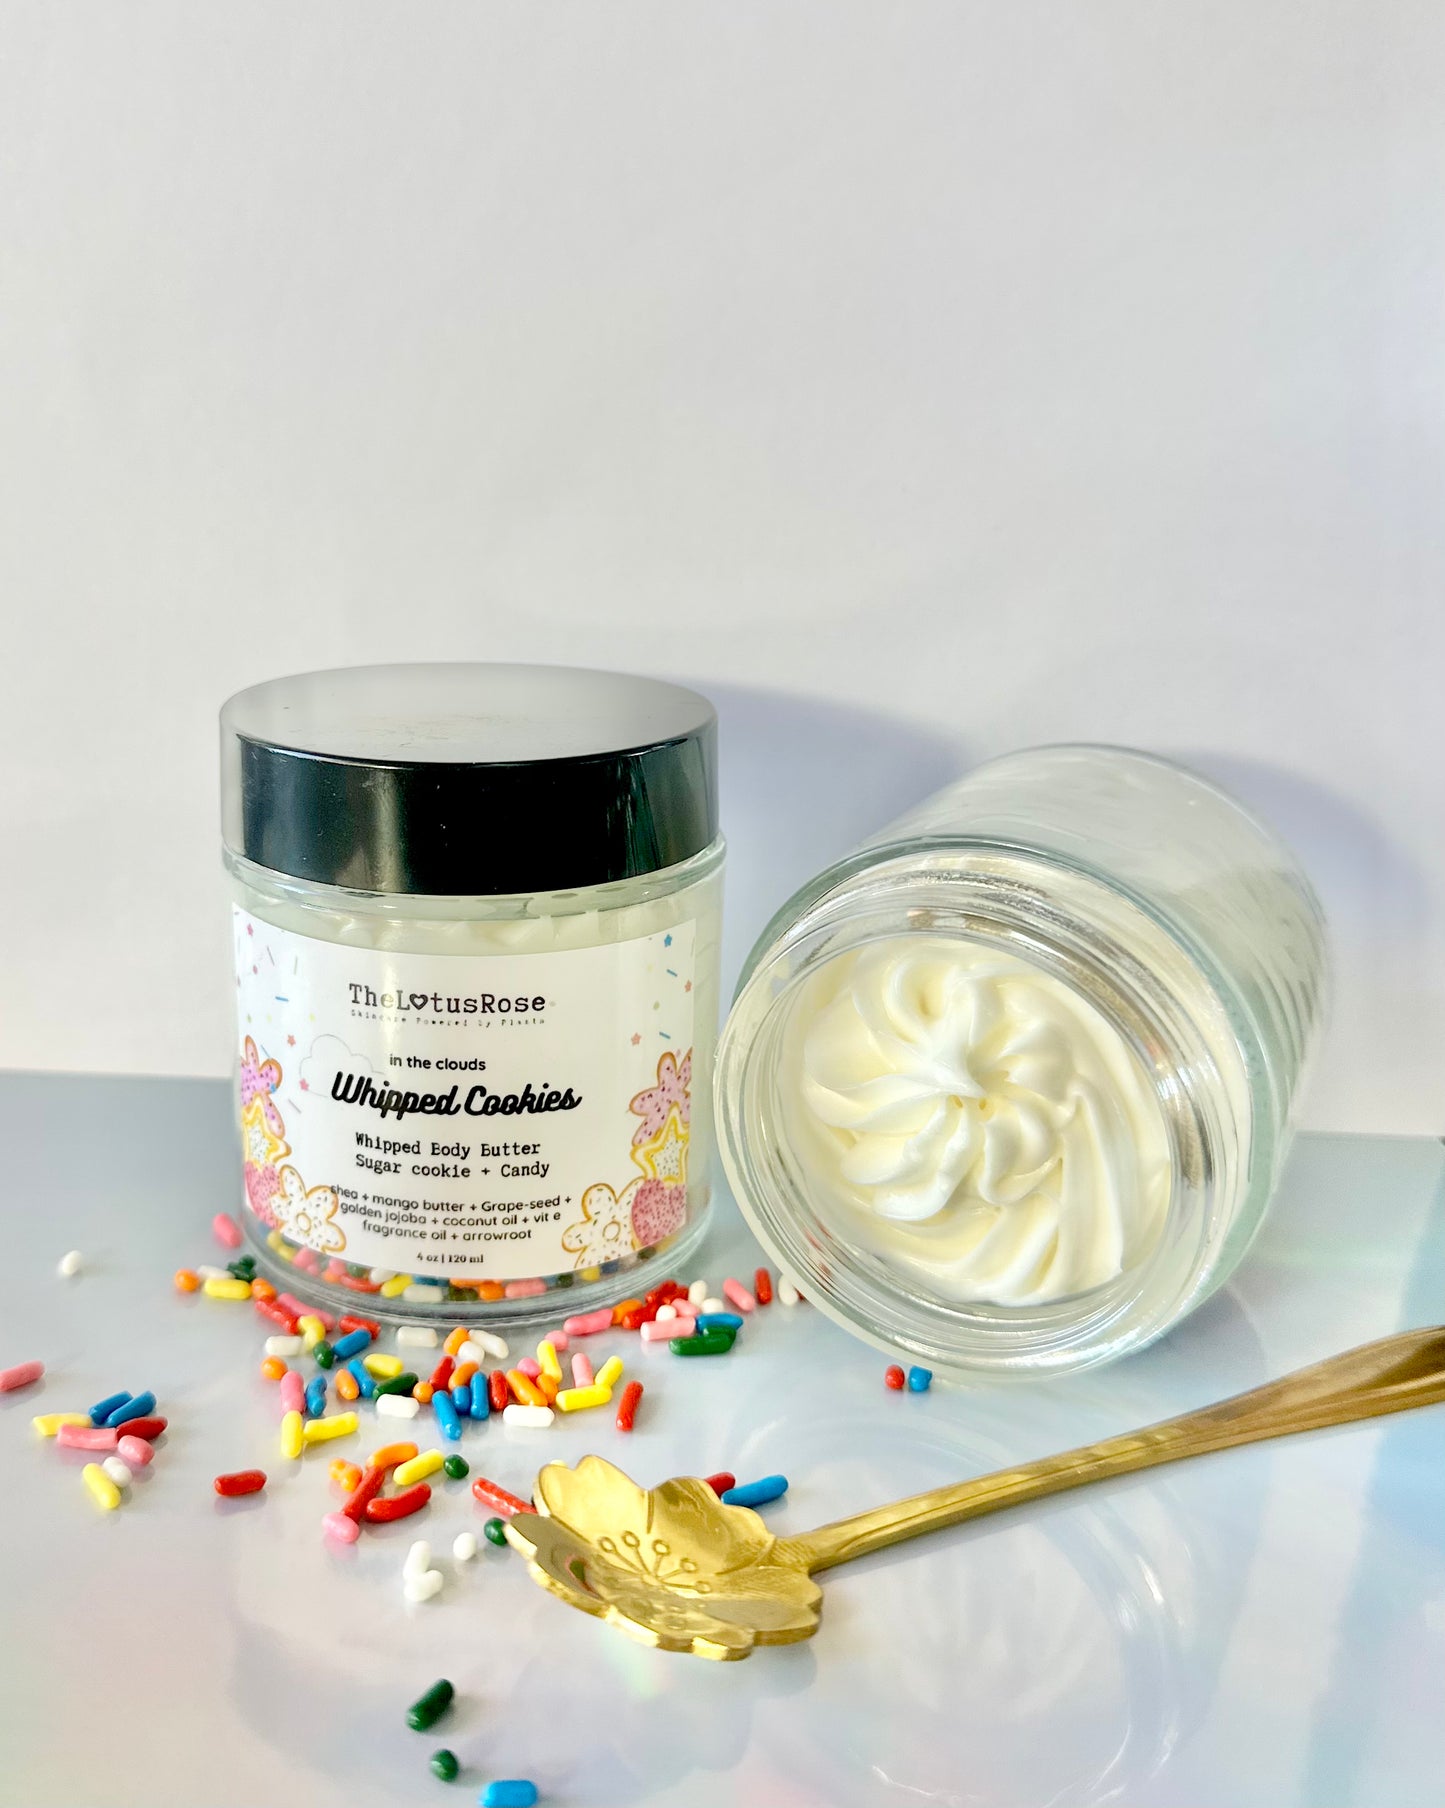 Whipped Body Butter Duo - Skins Superfood